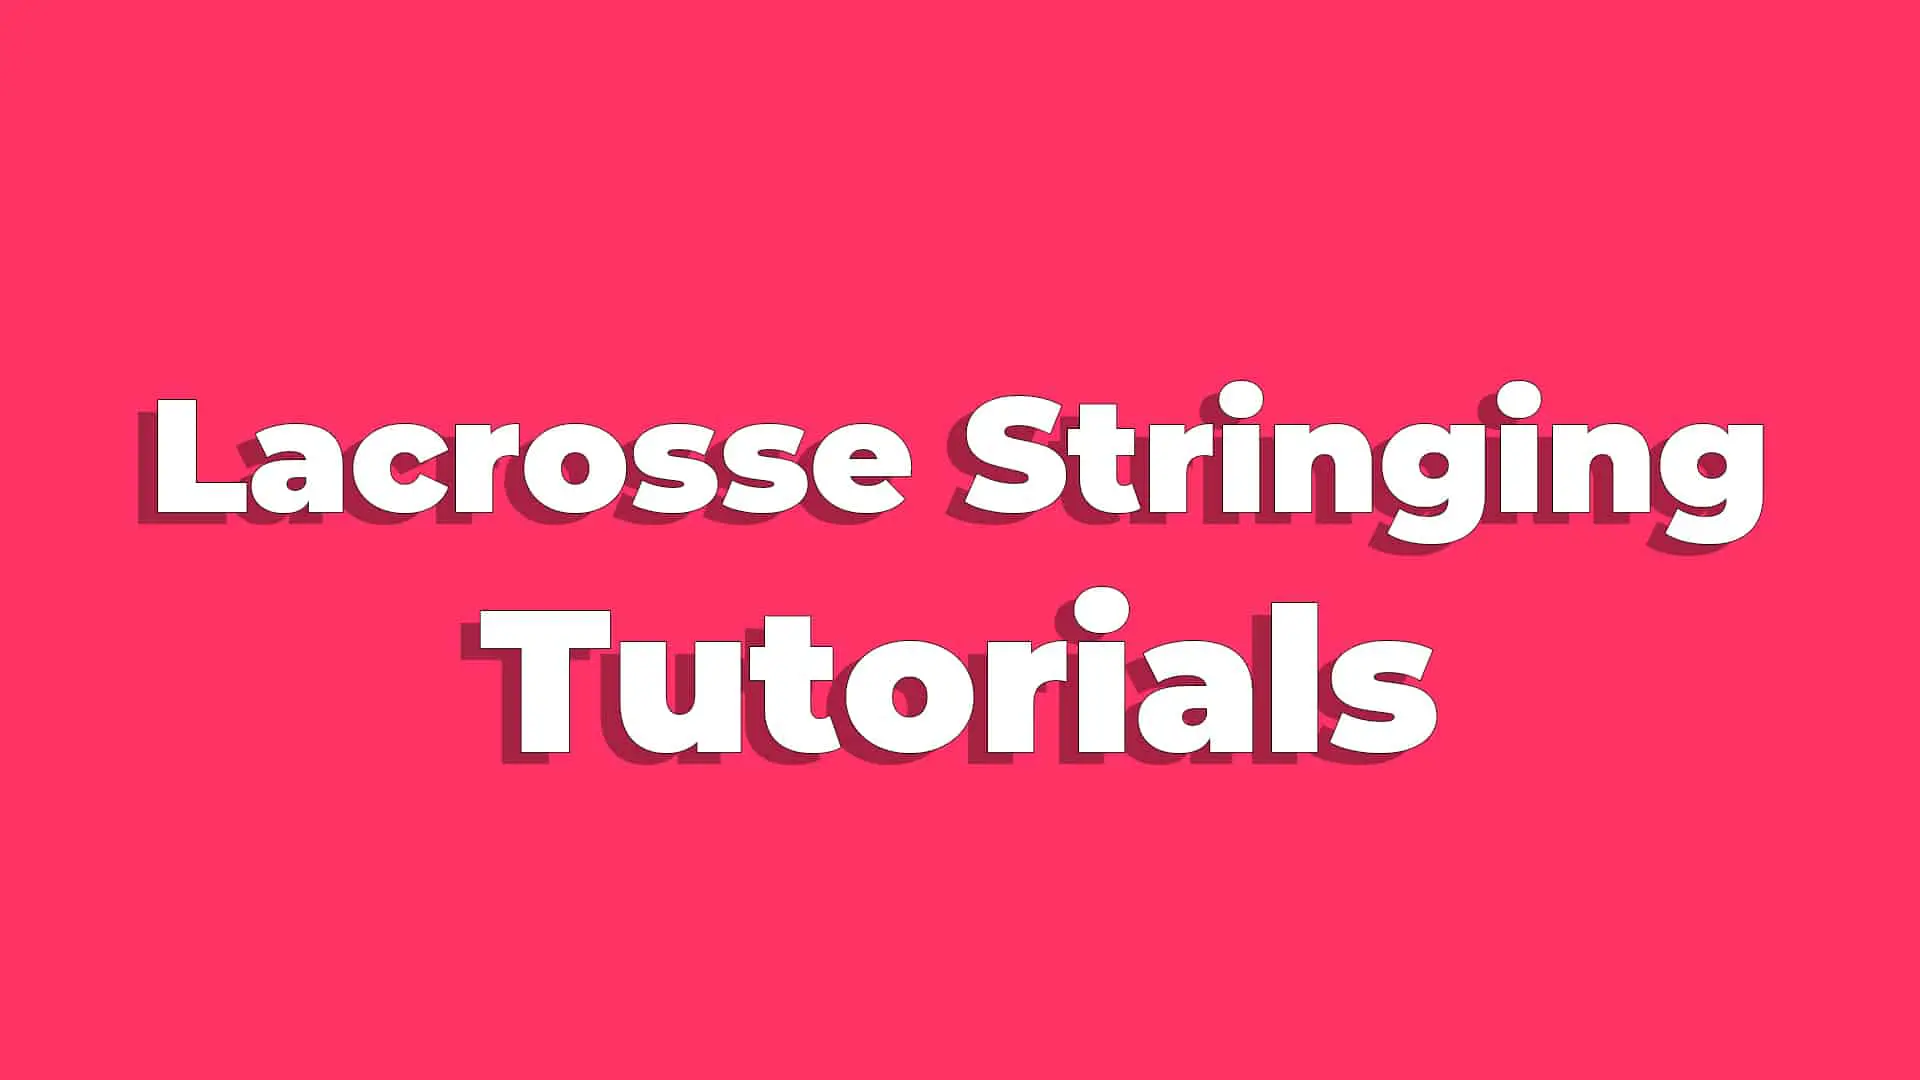 lacrosse stringing tutorials and sidewall patterns